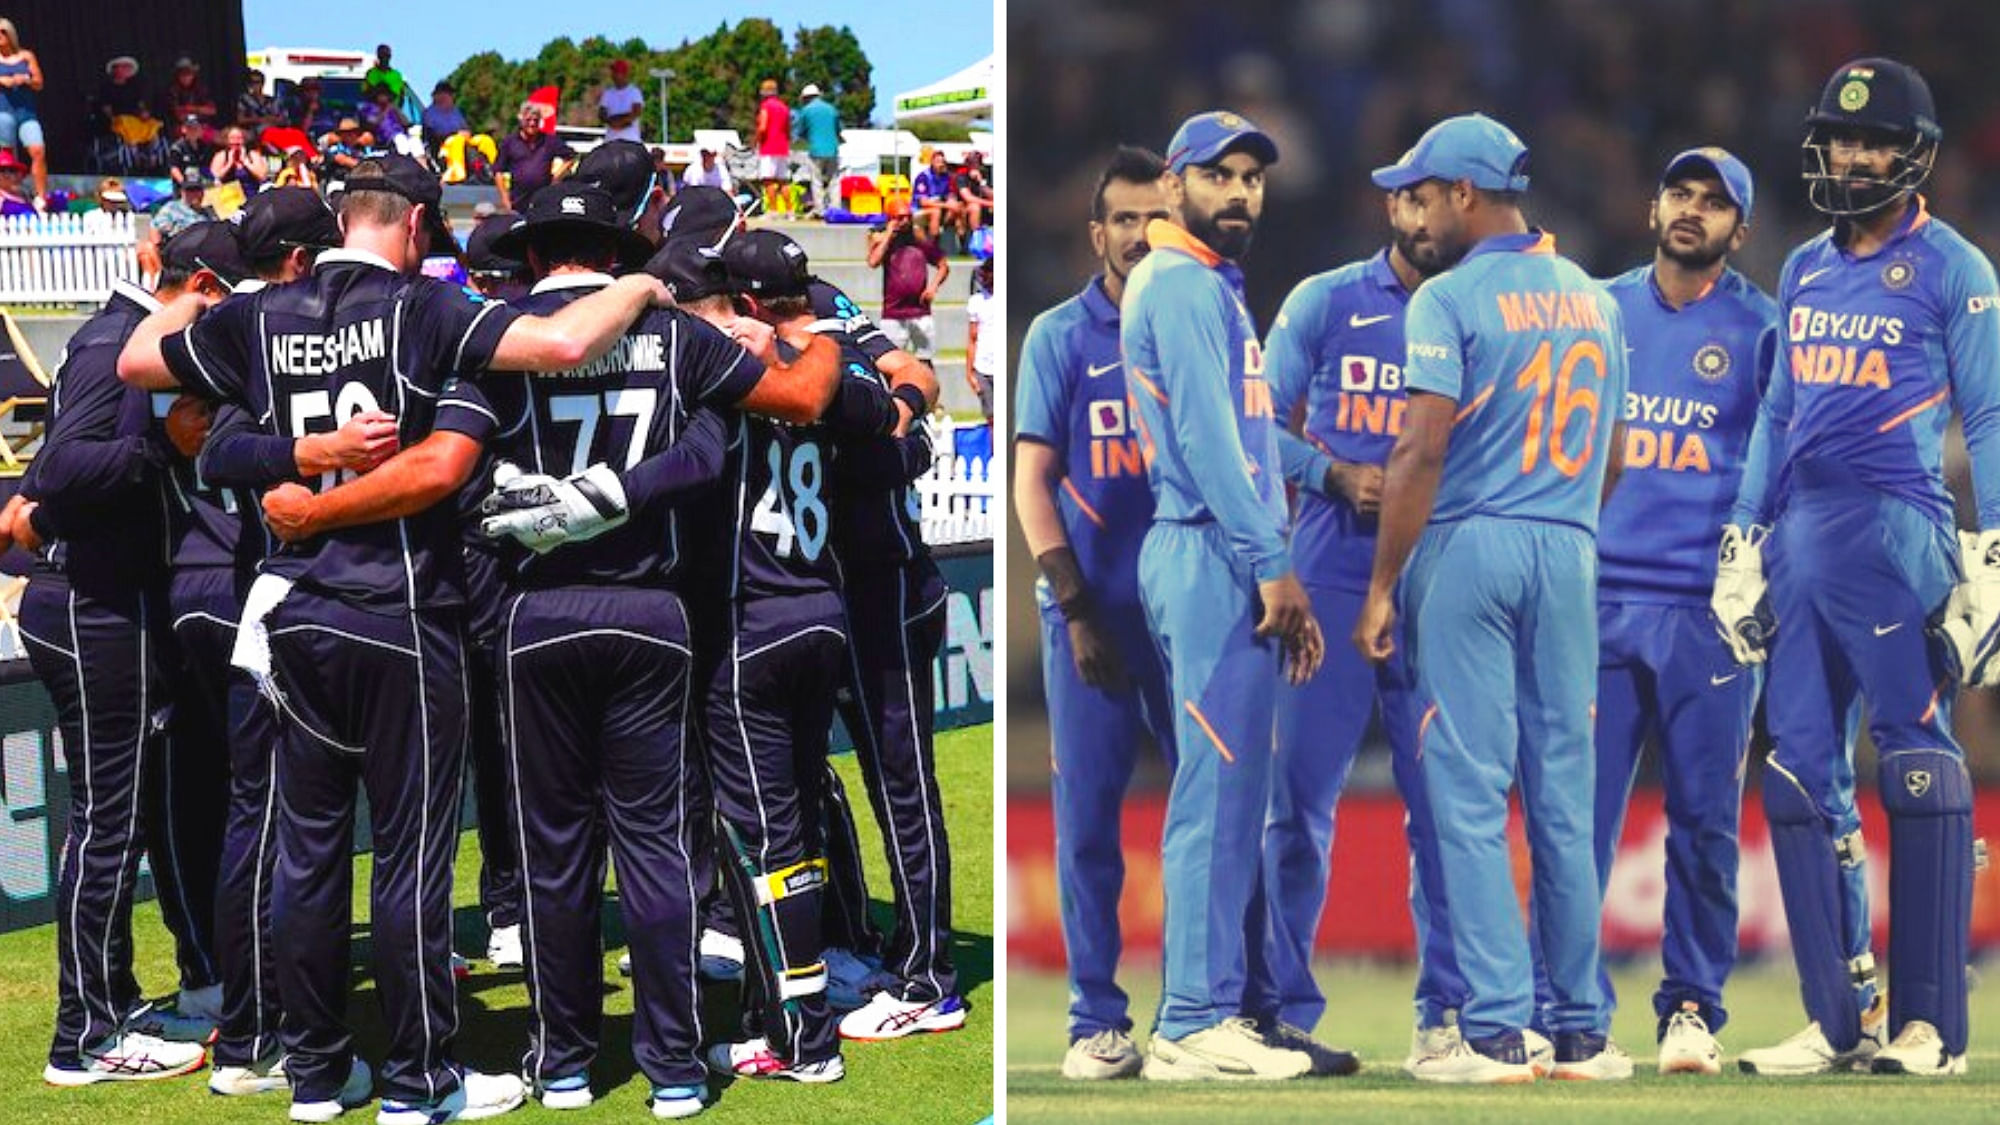 New Zealand beat India by 5 wickets in the third ODI to inflict a 3-0 whitewash on India.